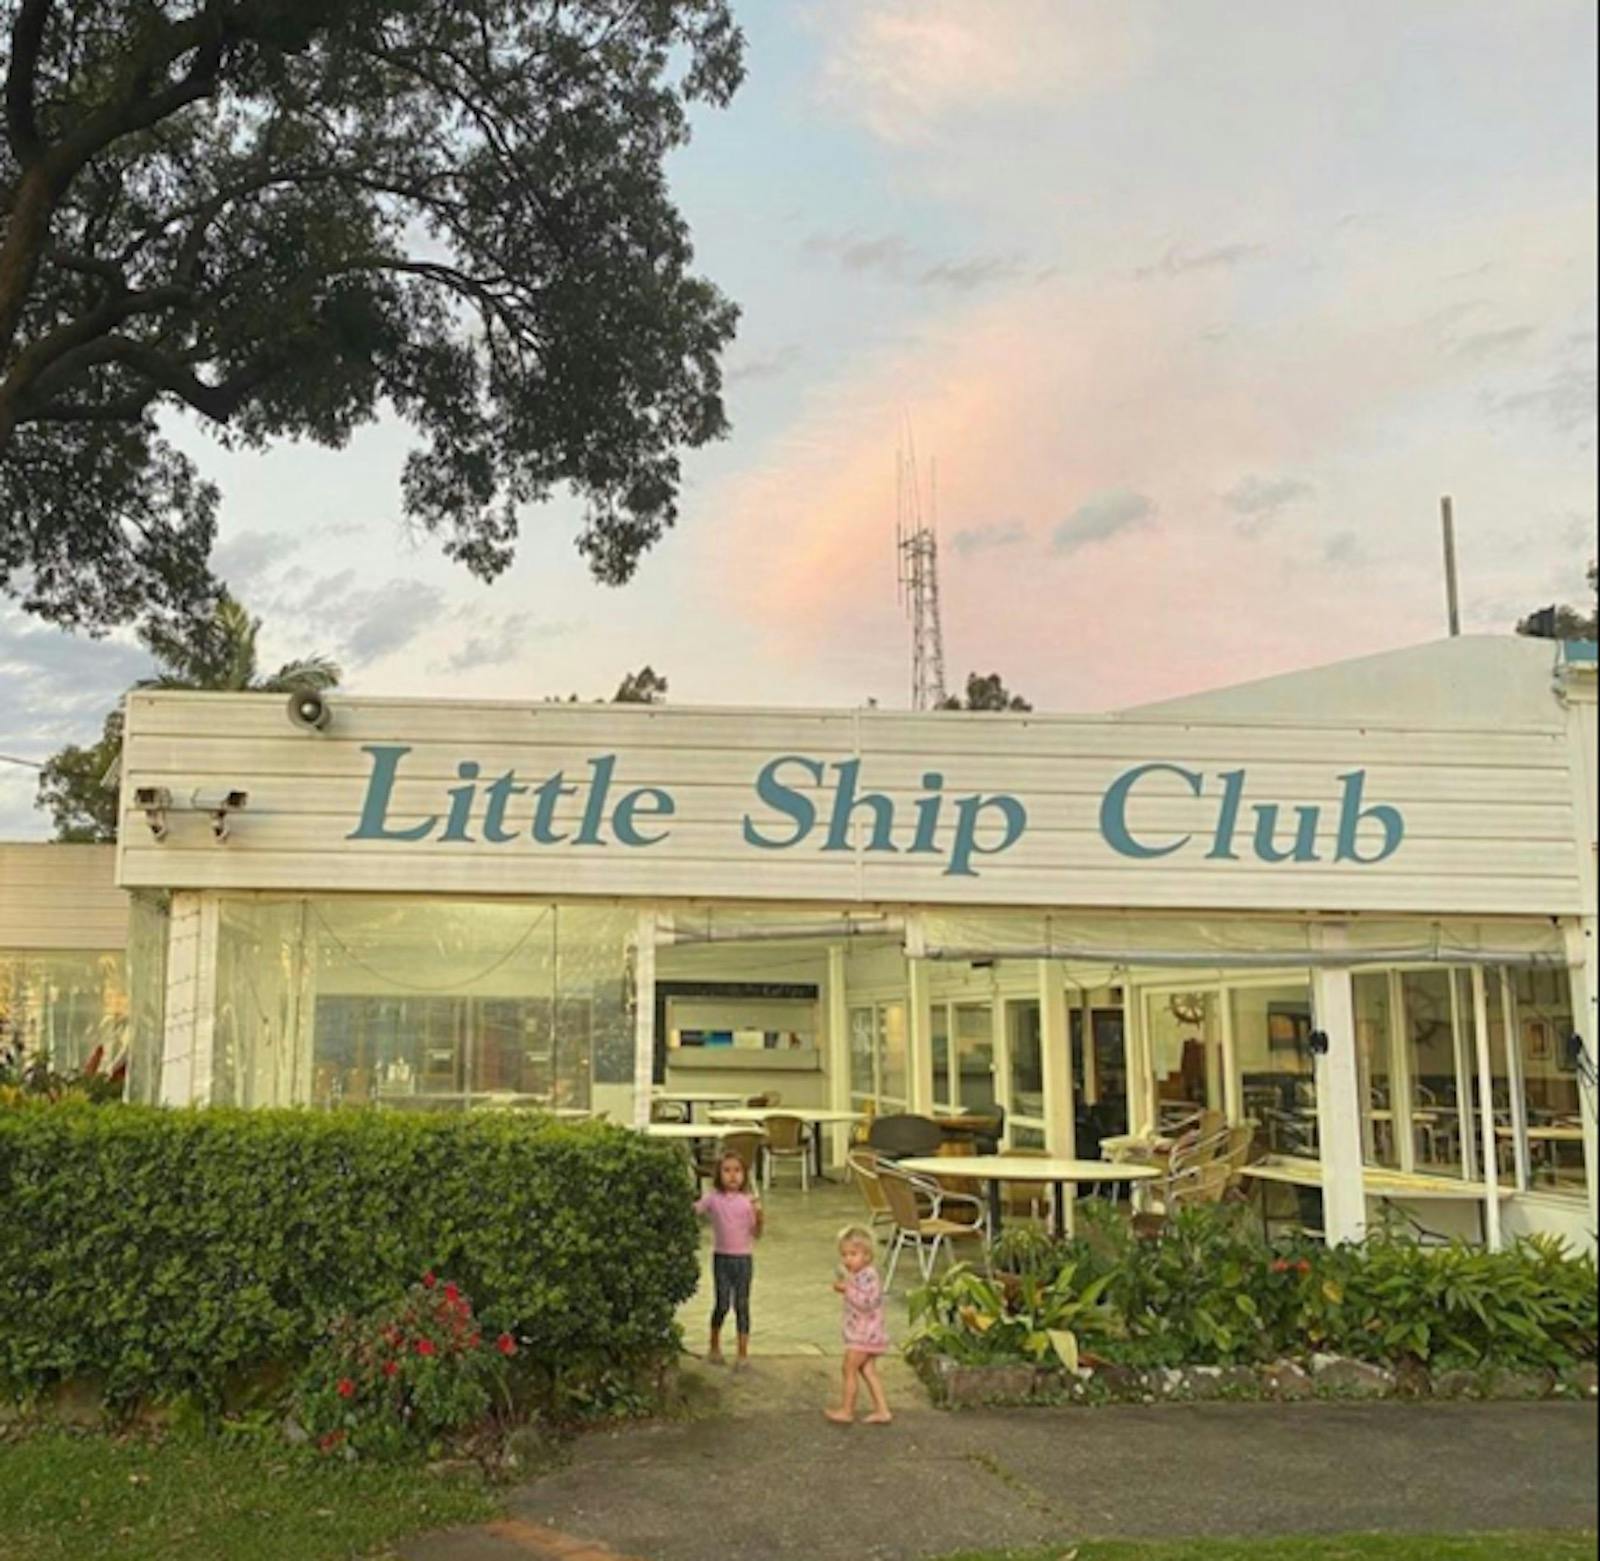 Little Ship Club - front of club